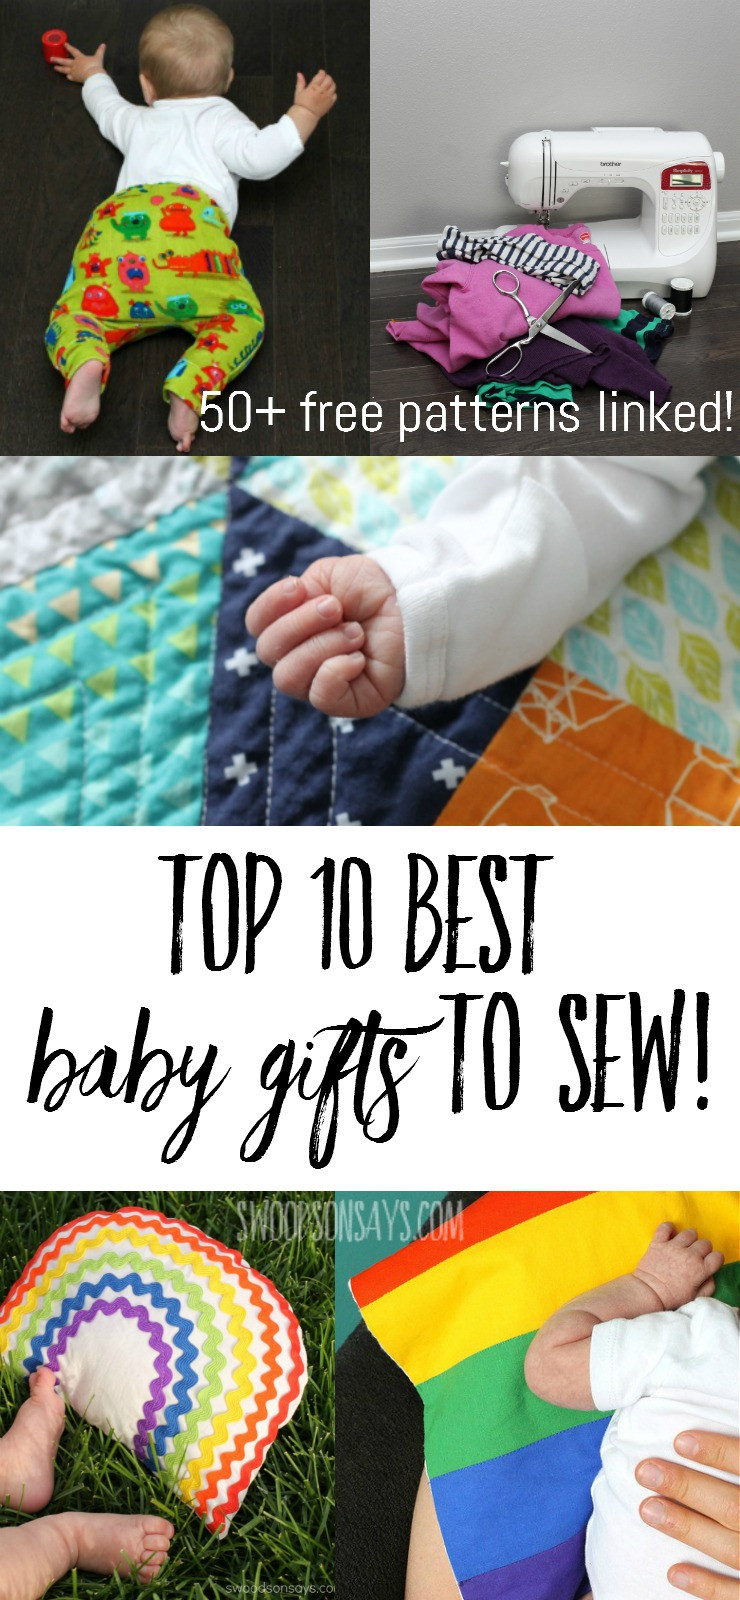 Homemade Baby Gifts Sewing
 100 Free baby sewing patterns for beginners